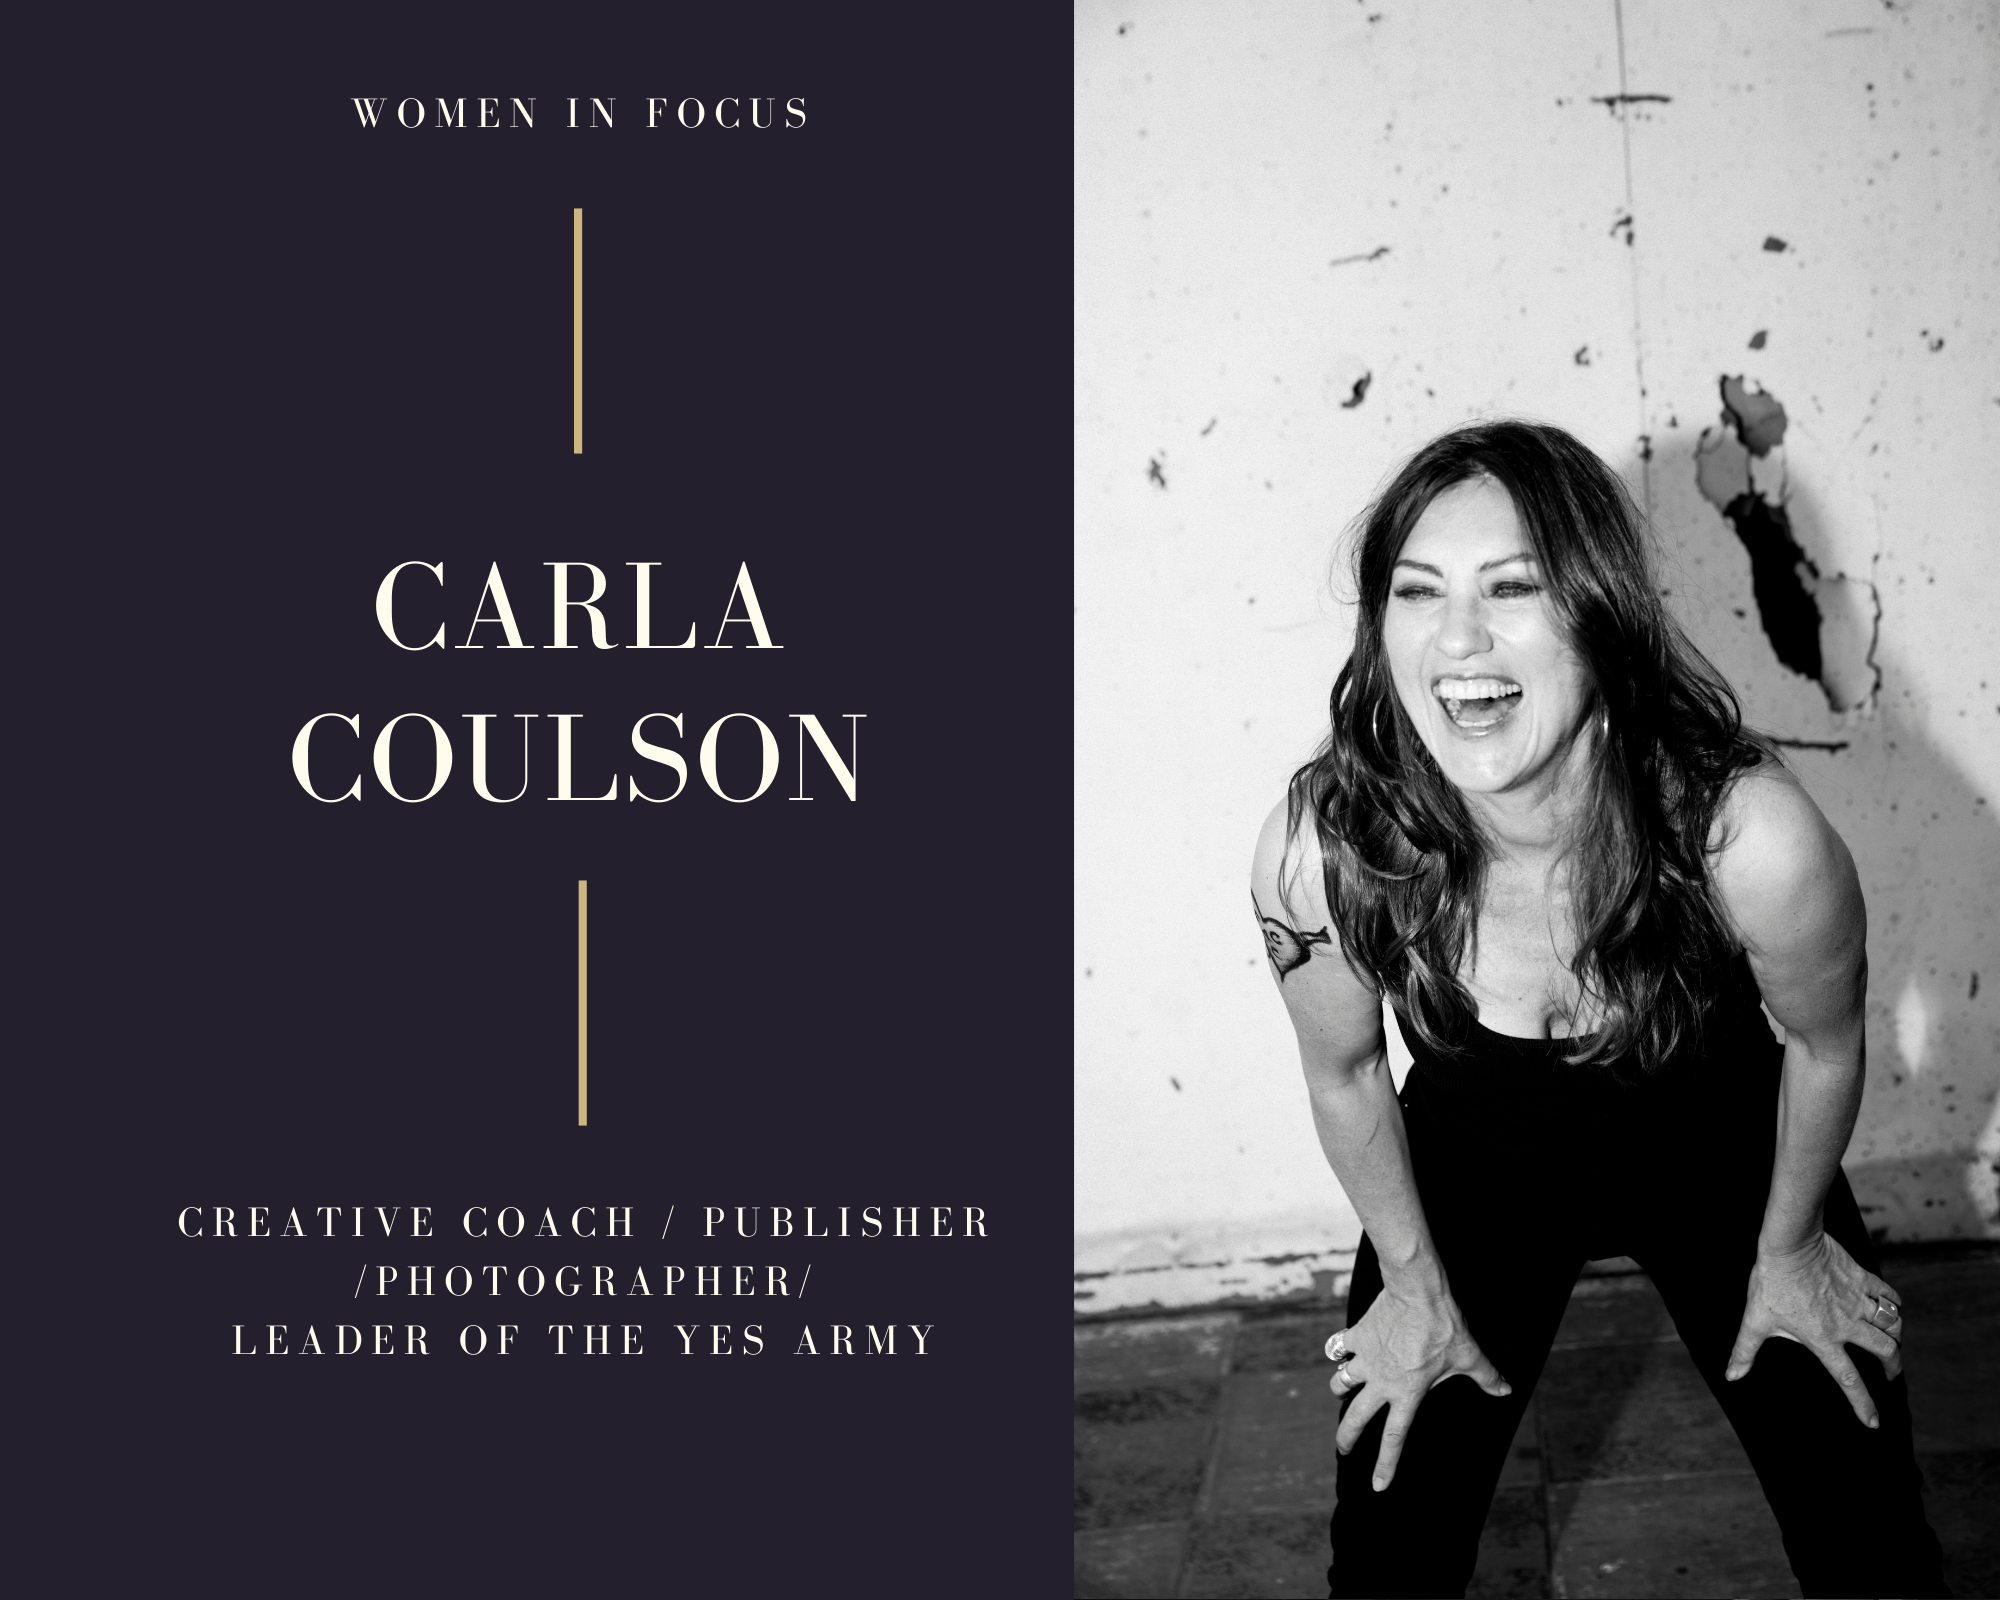 Susan Papazian Photography, Carla Coulson, Women In Focus, life of possibilities